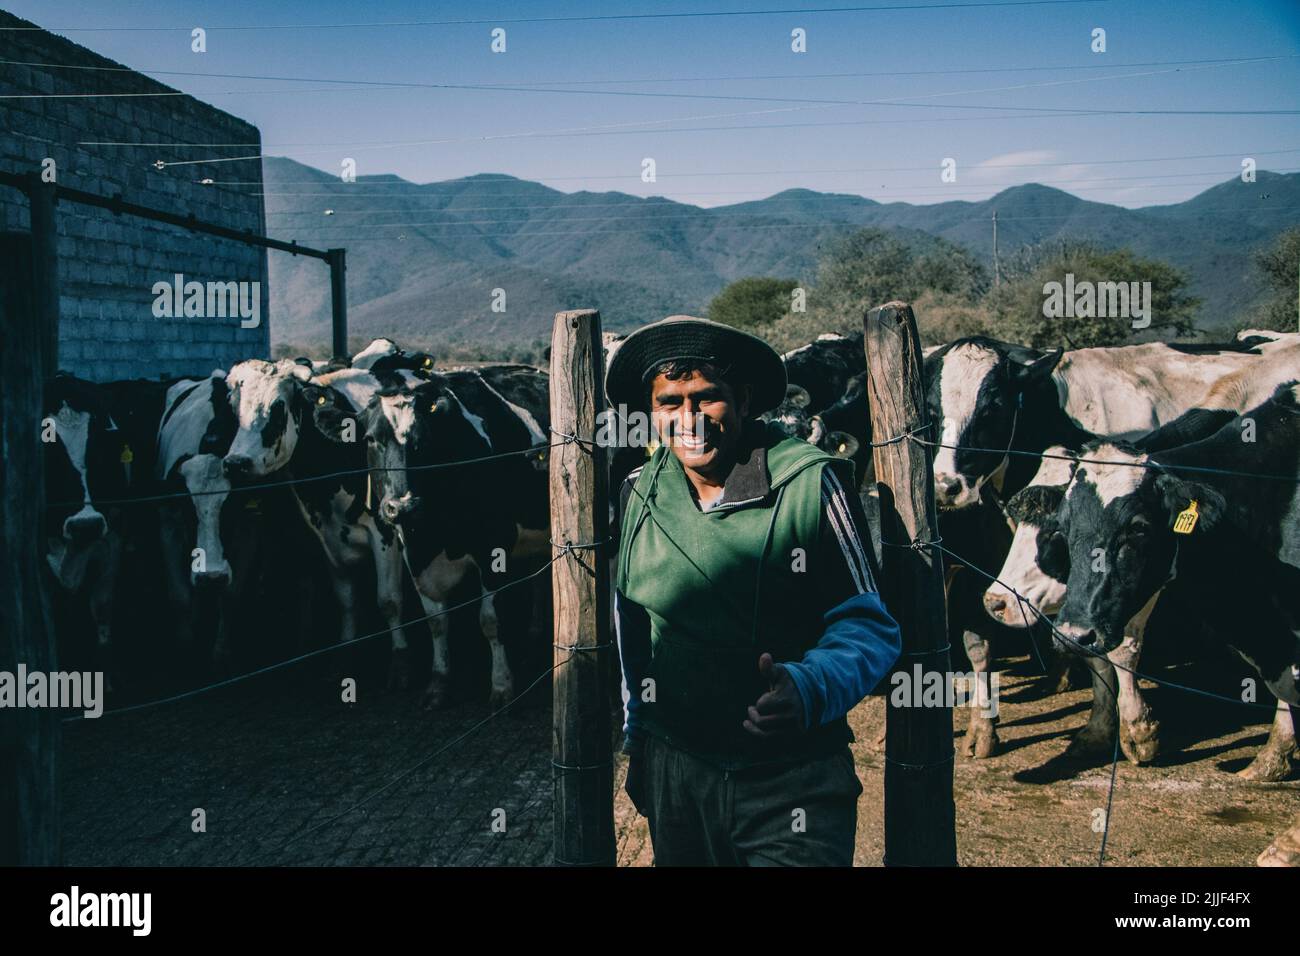 Farmworker smiles at the camera. This dairy is located in the outskirts of Salta, Argentina and has around 800 cows. Female cows are artificially inseminated for the first time at the age of 15 months. A cow's pregnancy, is like a human's, lasts nine months. Once the calf has been born, the cow is milked daily by the machine. On average, six to eight weeks after the birth of the calf, the cow is inseminated again. After about 5-6 years she stops giving milk and the animal is slaughtered. (Photo by Lara Hauser/SOPA Images/Sipa USA) Stock Photo